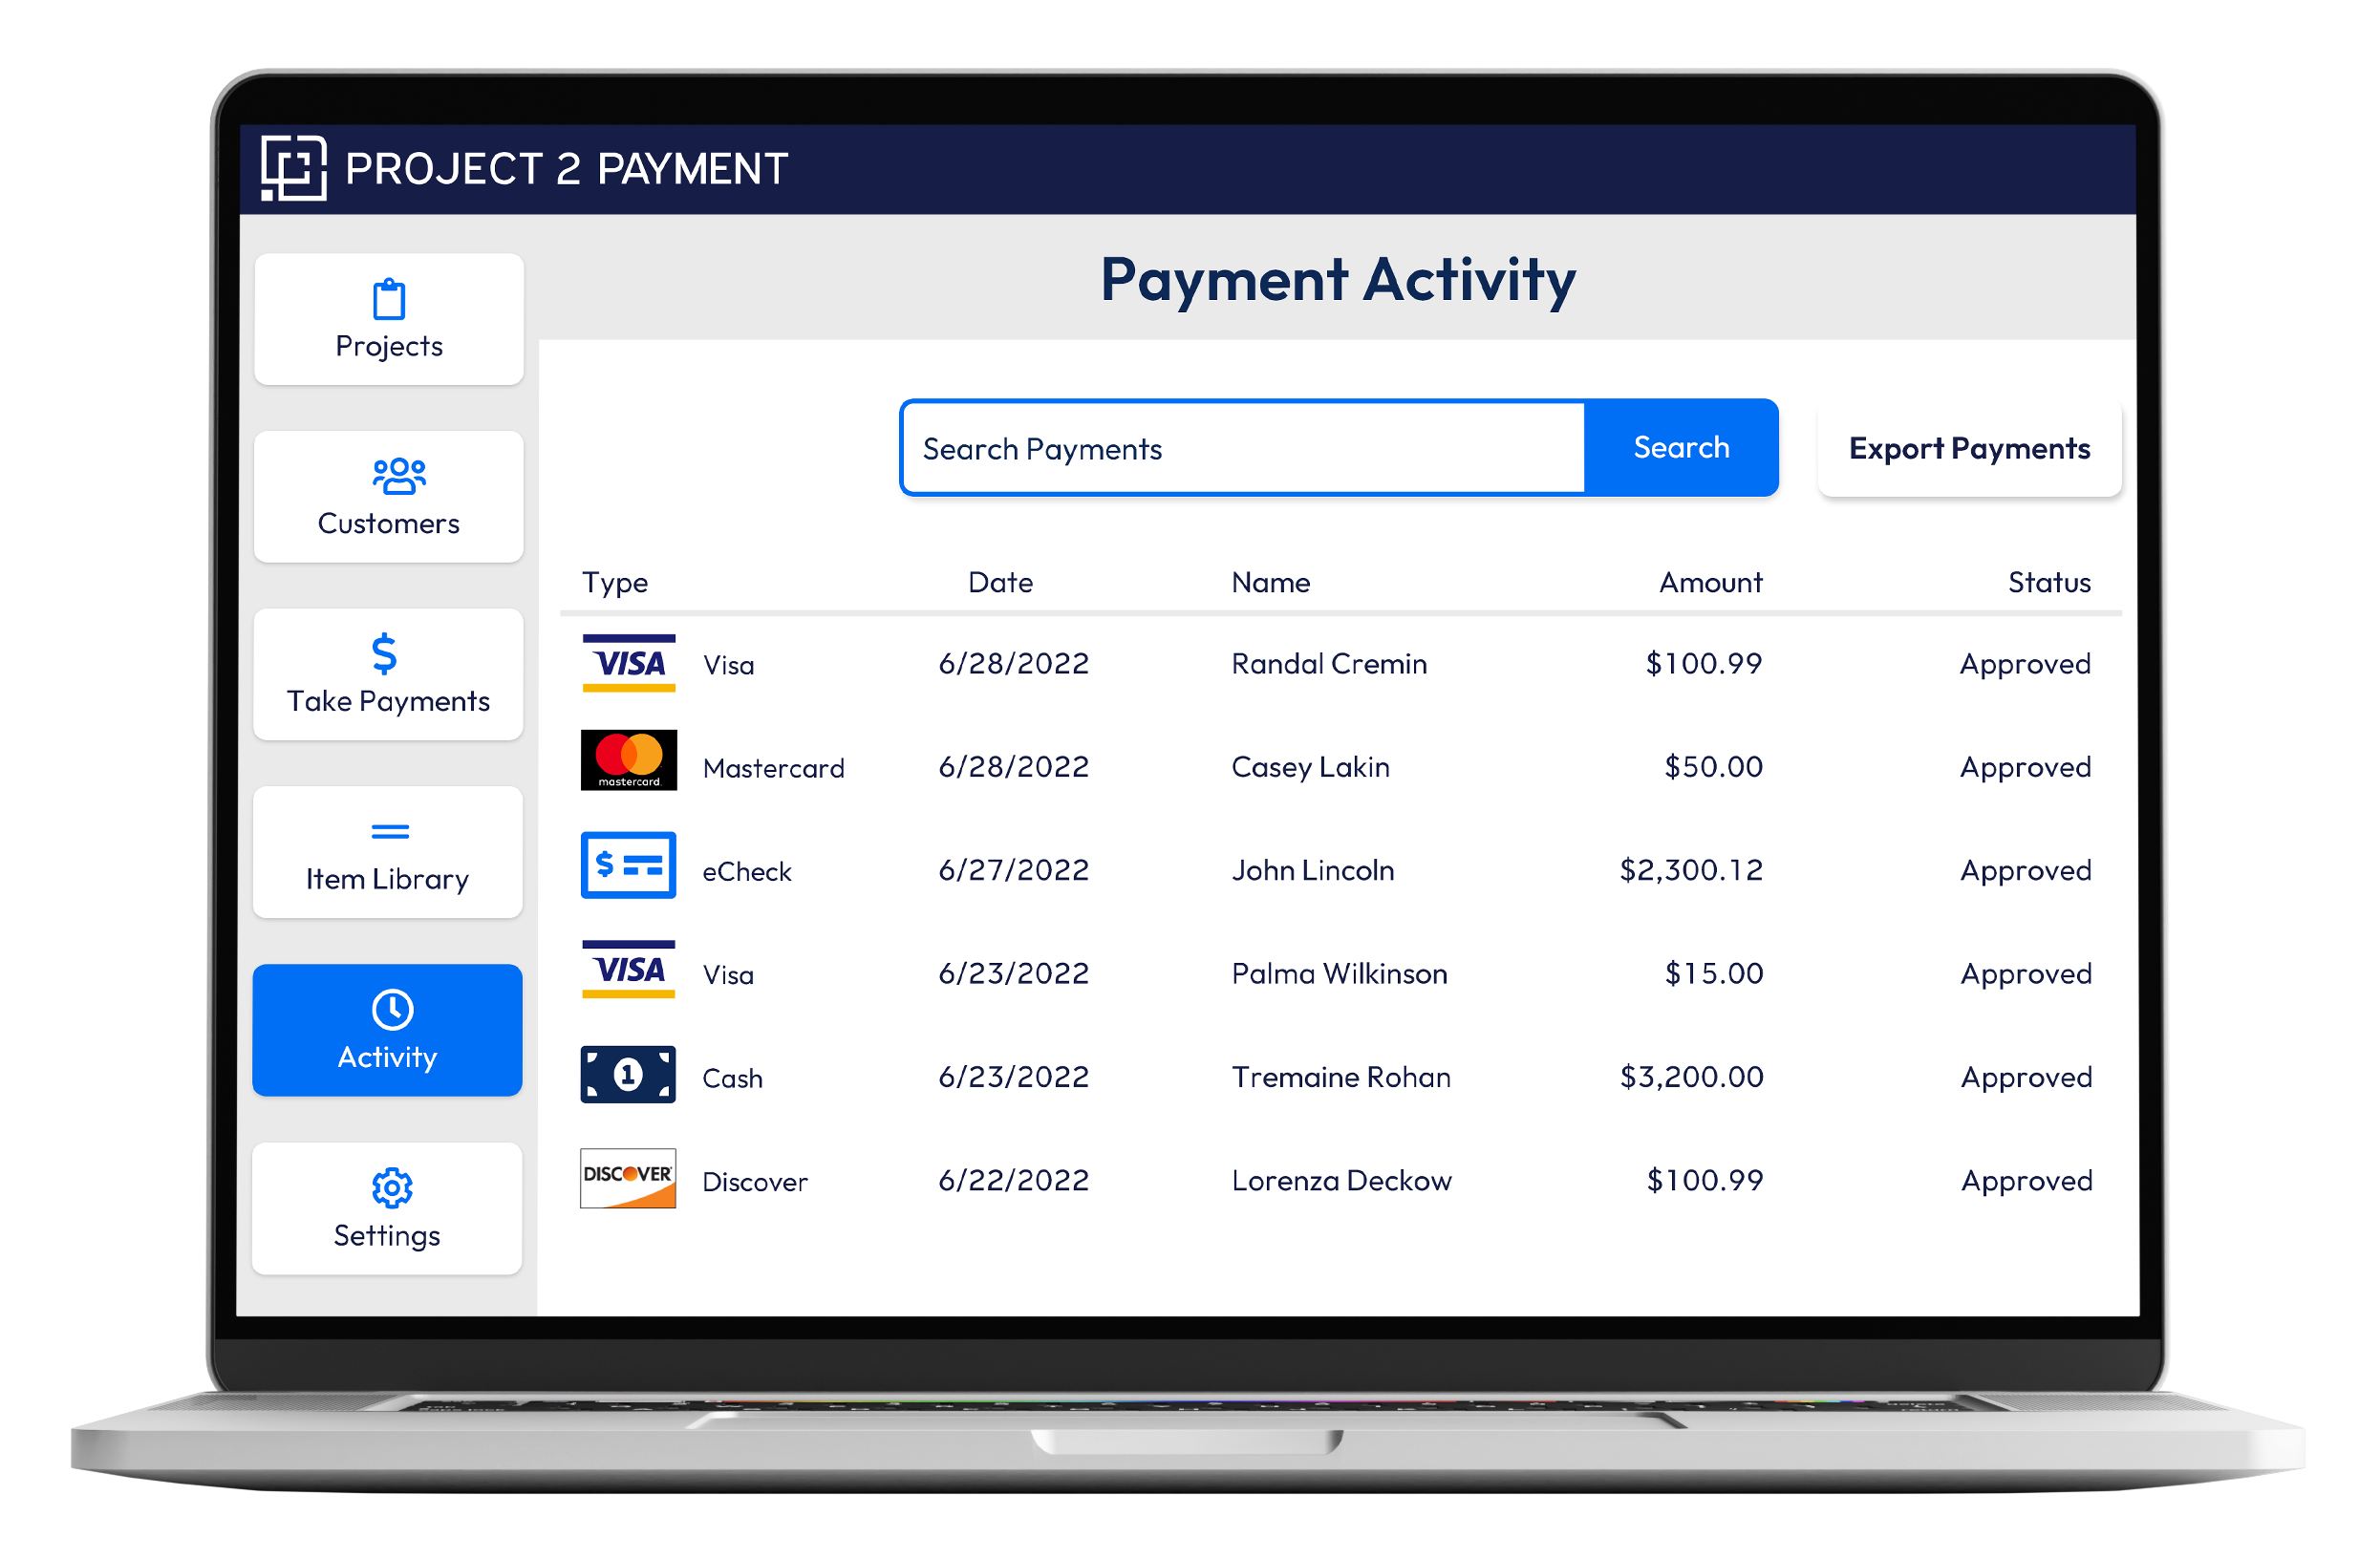 Project 2 Payment Payment Activity View ready for Export